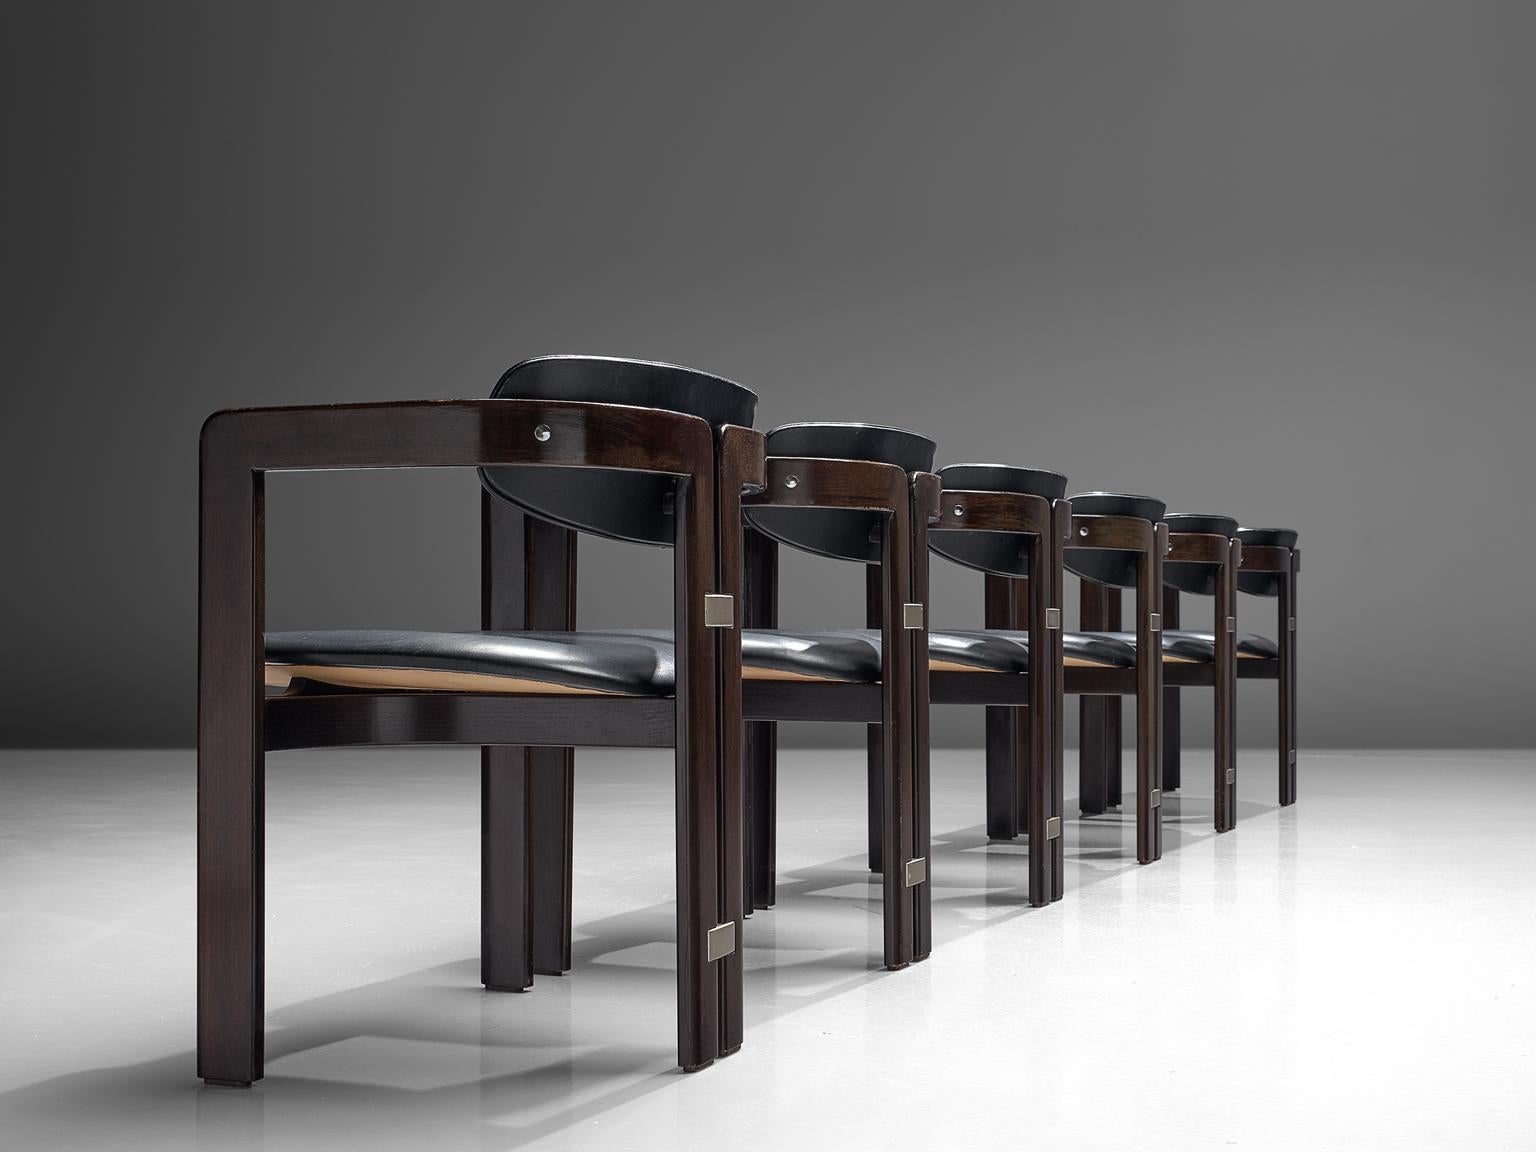 Augusto Savini for Pozzi, set of 6 ‘Pamplona’ armchairs, dark blue leather, dark brown coated wood, metal, Italy, 1960s.

Set of six armchairs in dark brown coated wood and dark blue leather. The chairs have a unique and characteristic design;